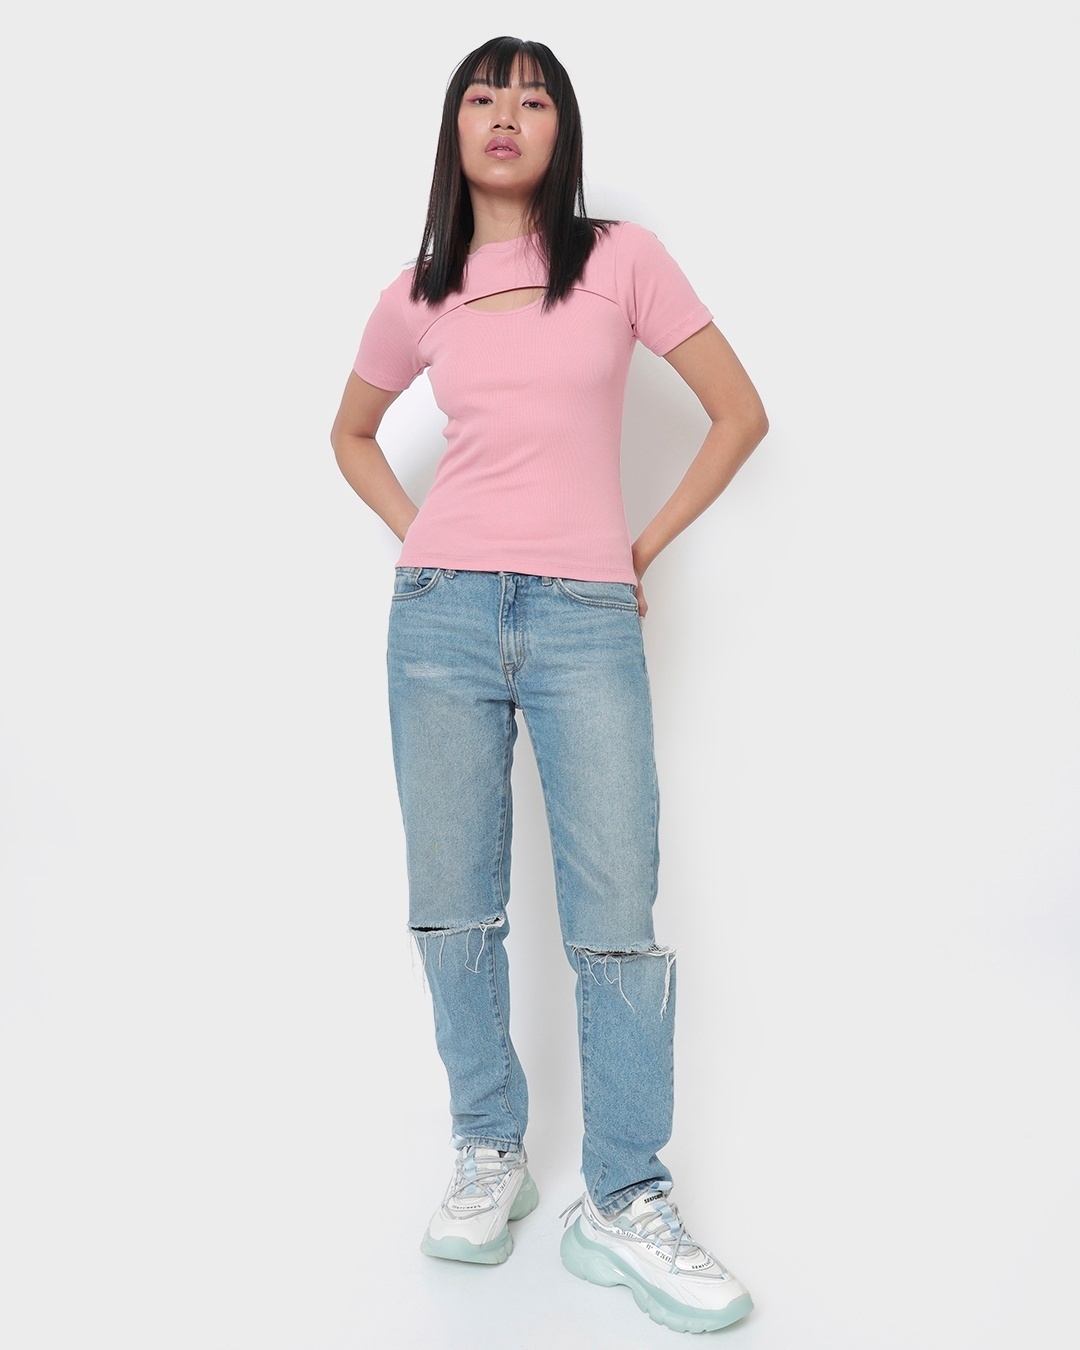 Shop Women's Cheeky Pink Keyhole Ribbed Slim Fit Short Top